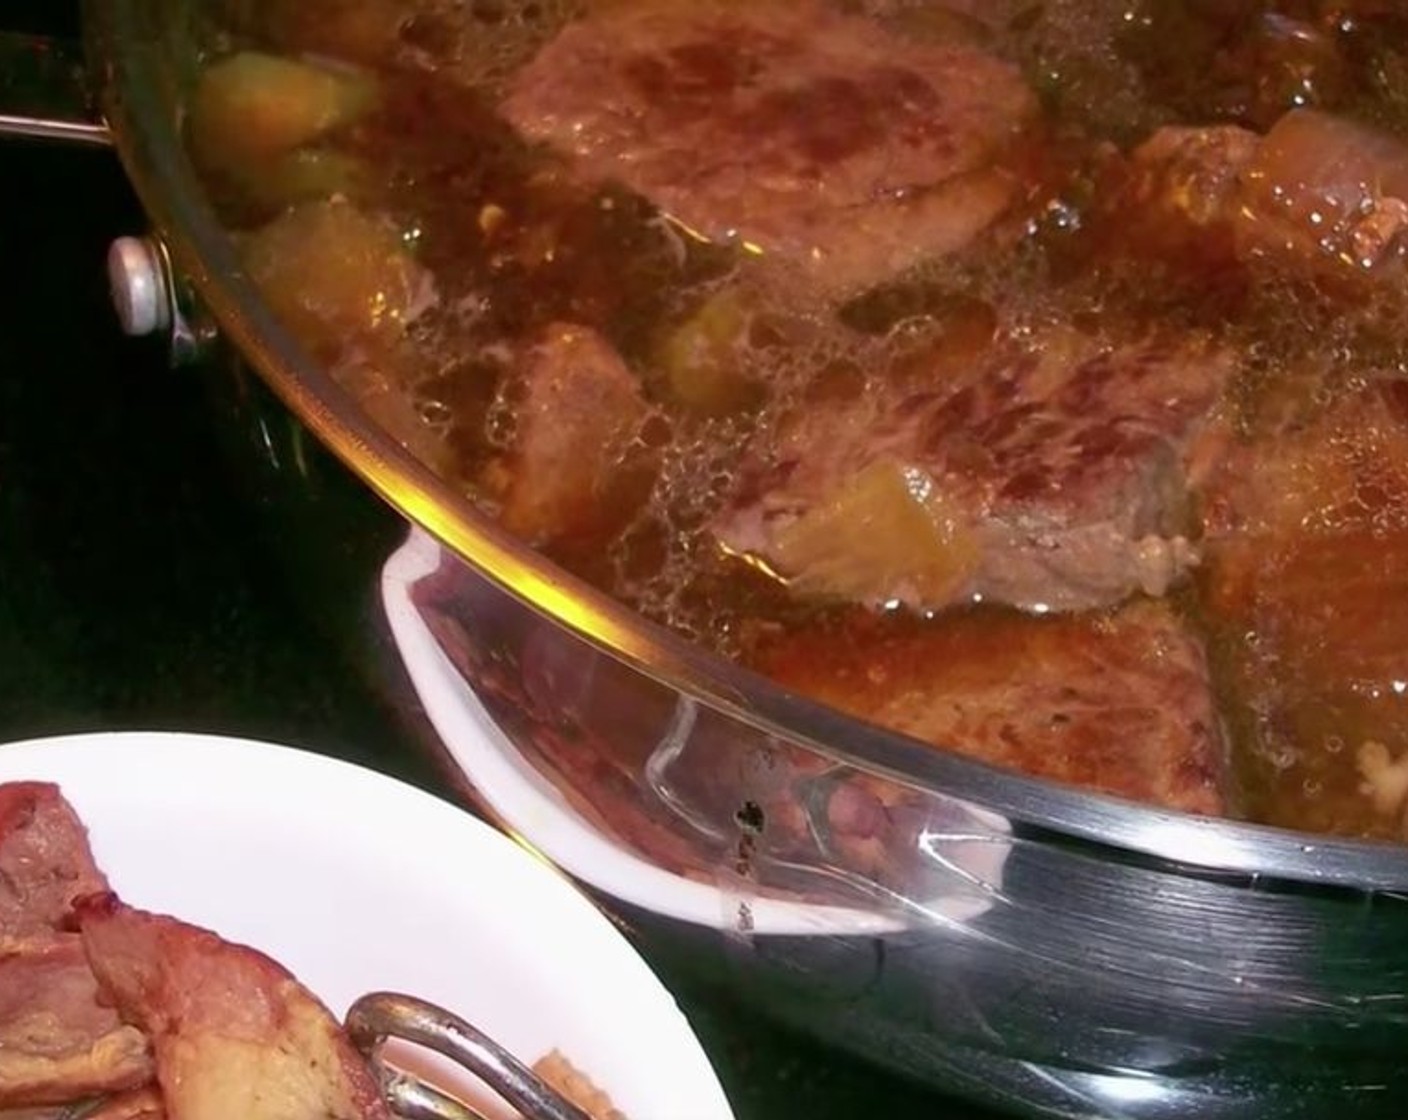 step 5 Simmer for 1-2 hours, depending on how tender the cut of beef is. Remove bacon. It will be soft and unpleasant to eat. Remove the meat and set it to the side while you thicken the gravy.